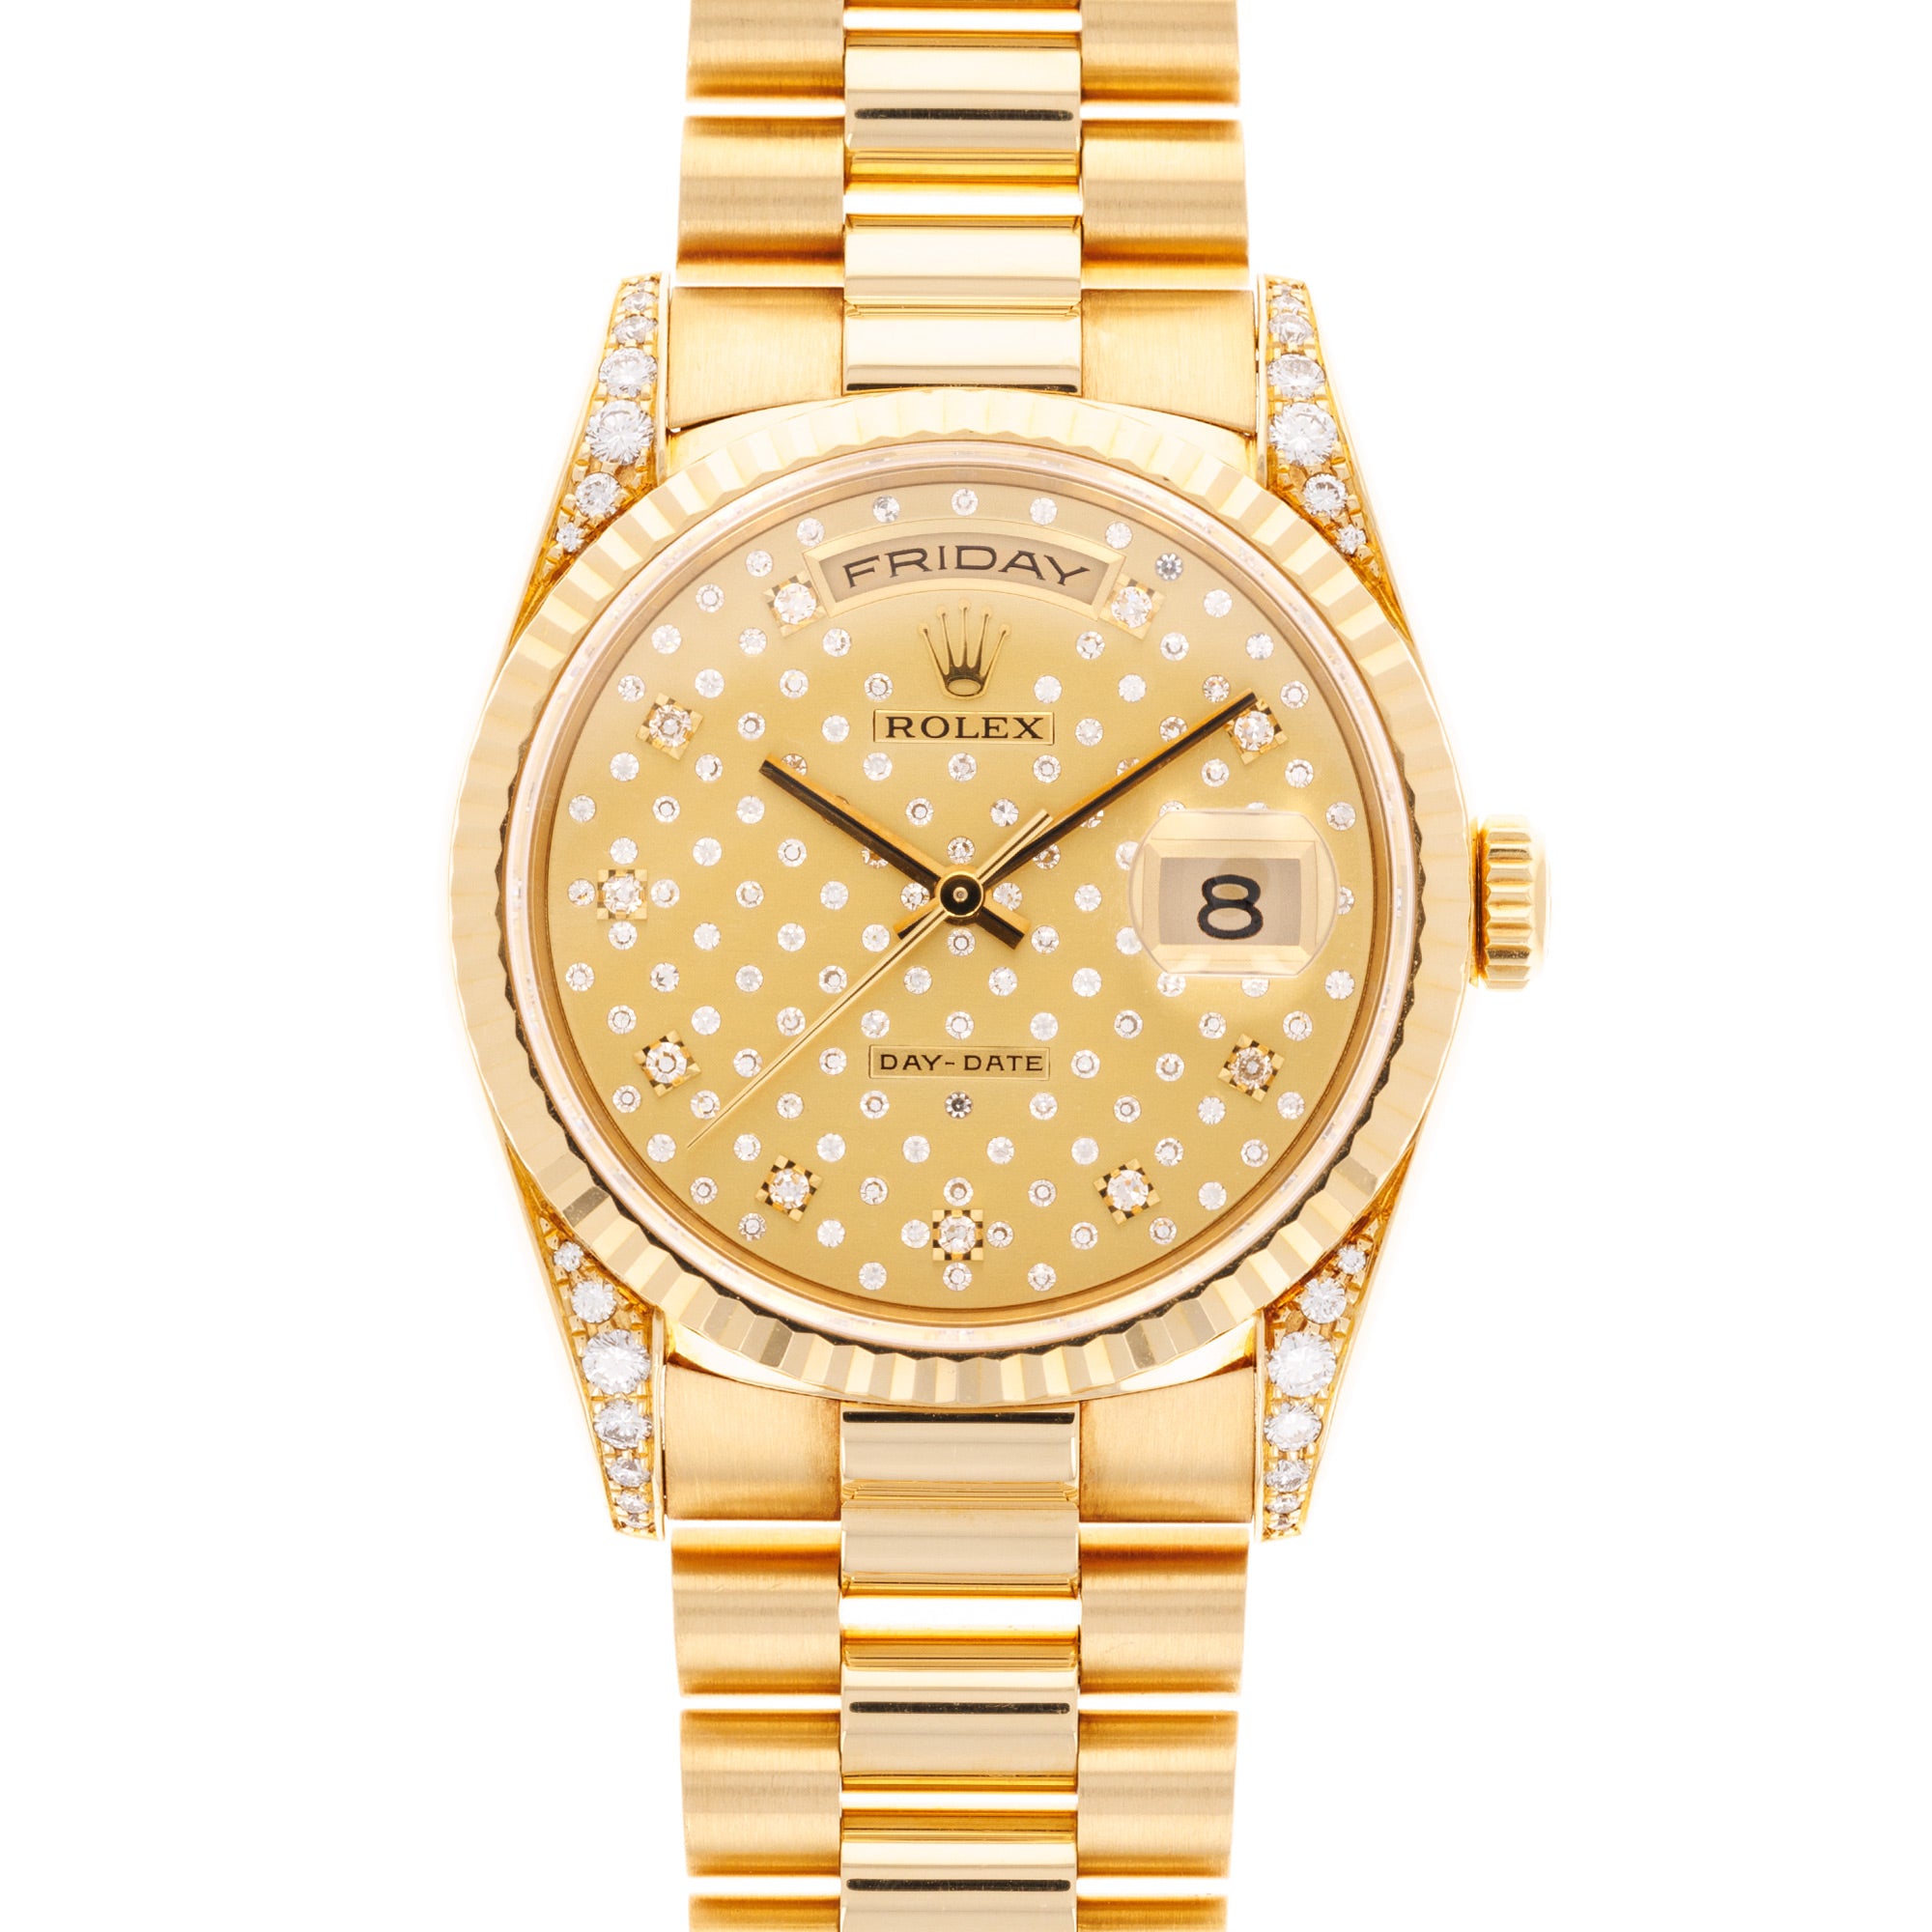 Rolex - Rolex Yellow Gold Day-Date Watch Ref. 18338 with Diamond Dial - The Keystone Watches